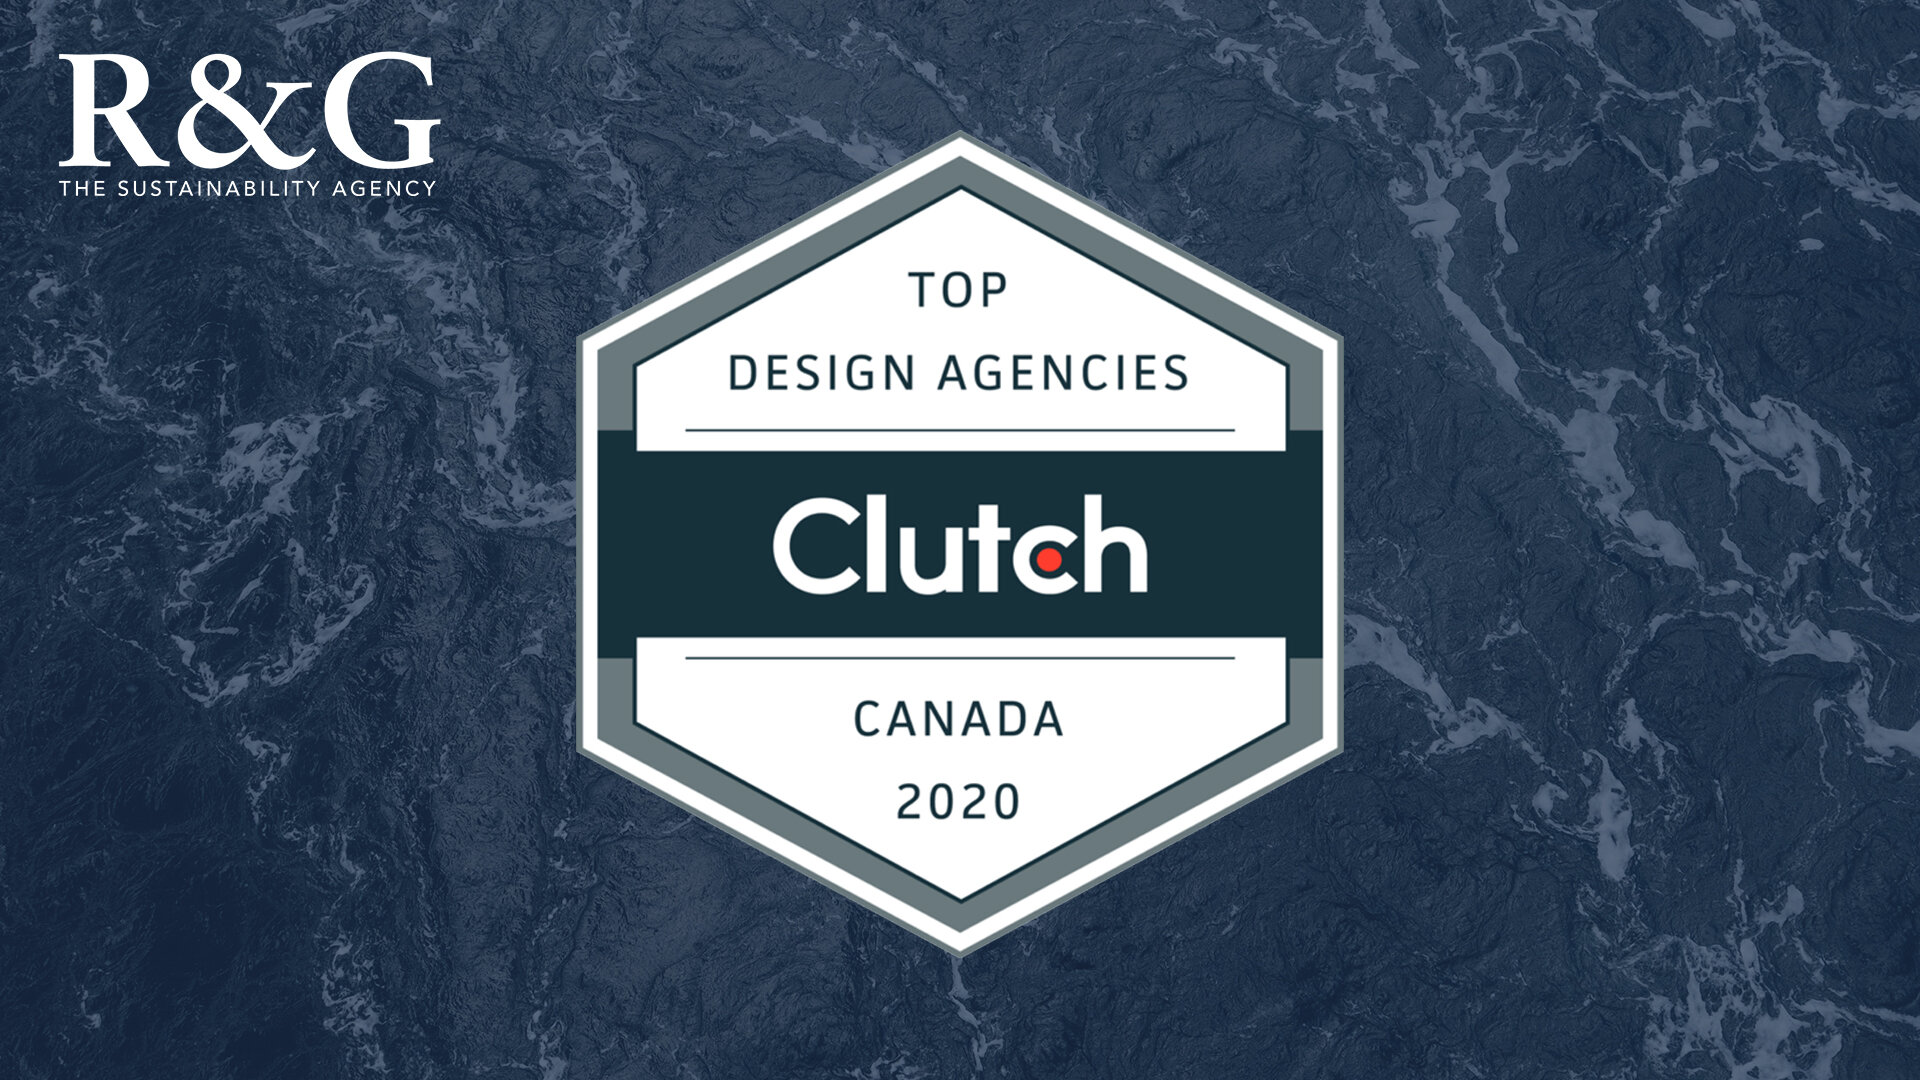 R&G Strategic Recognized as Top Design Agency by Clutch